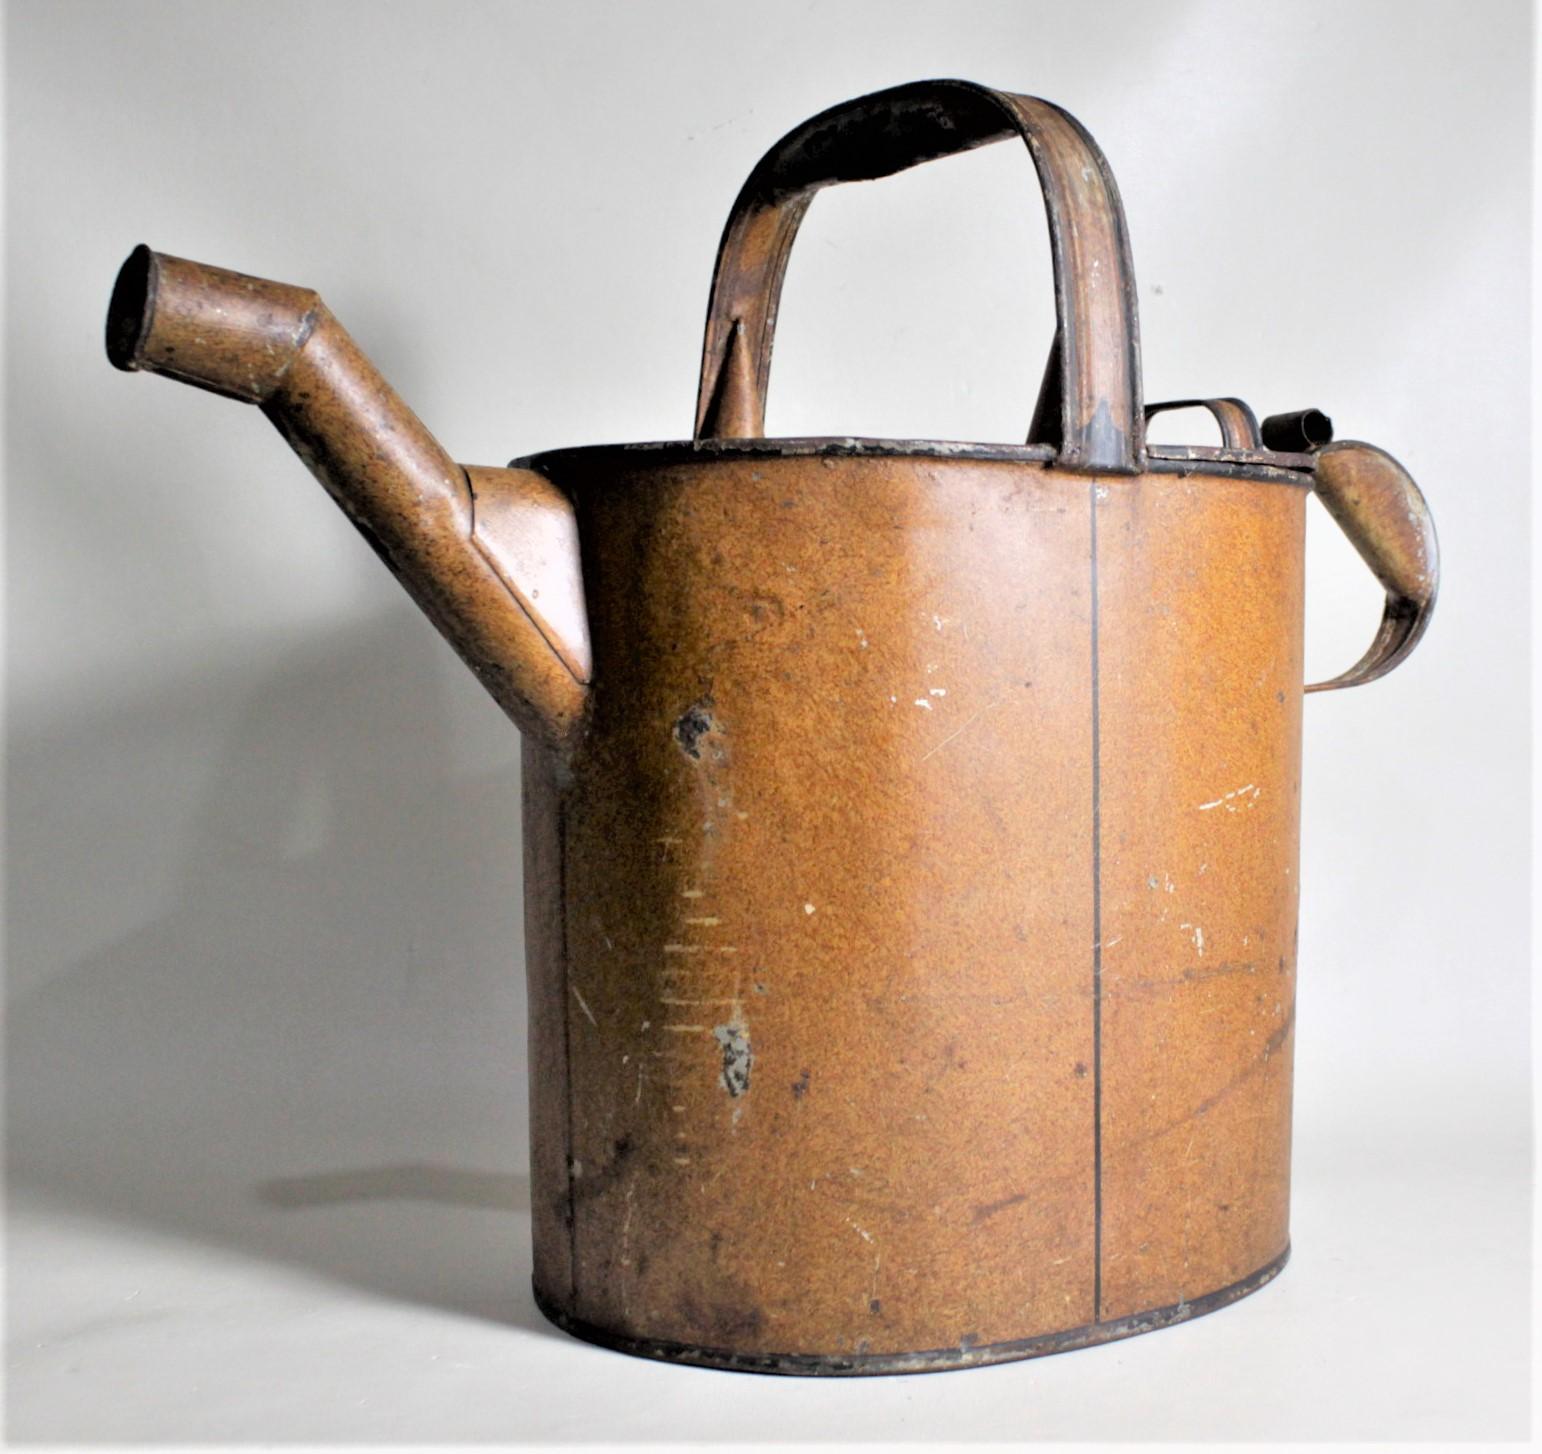 This antique handcrafted water can was made by John Mileuengrav, an Ironmonger from Perth Scotland in circa 1880 in the period Victorian style. This large watering can shaped vessel was made for domestic use in a very affluent home for, most likely,